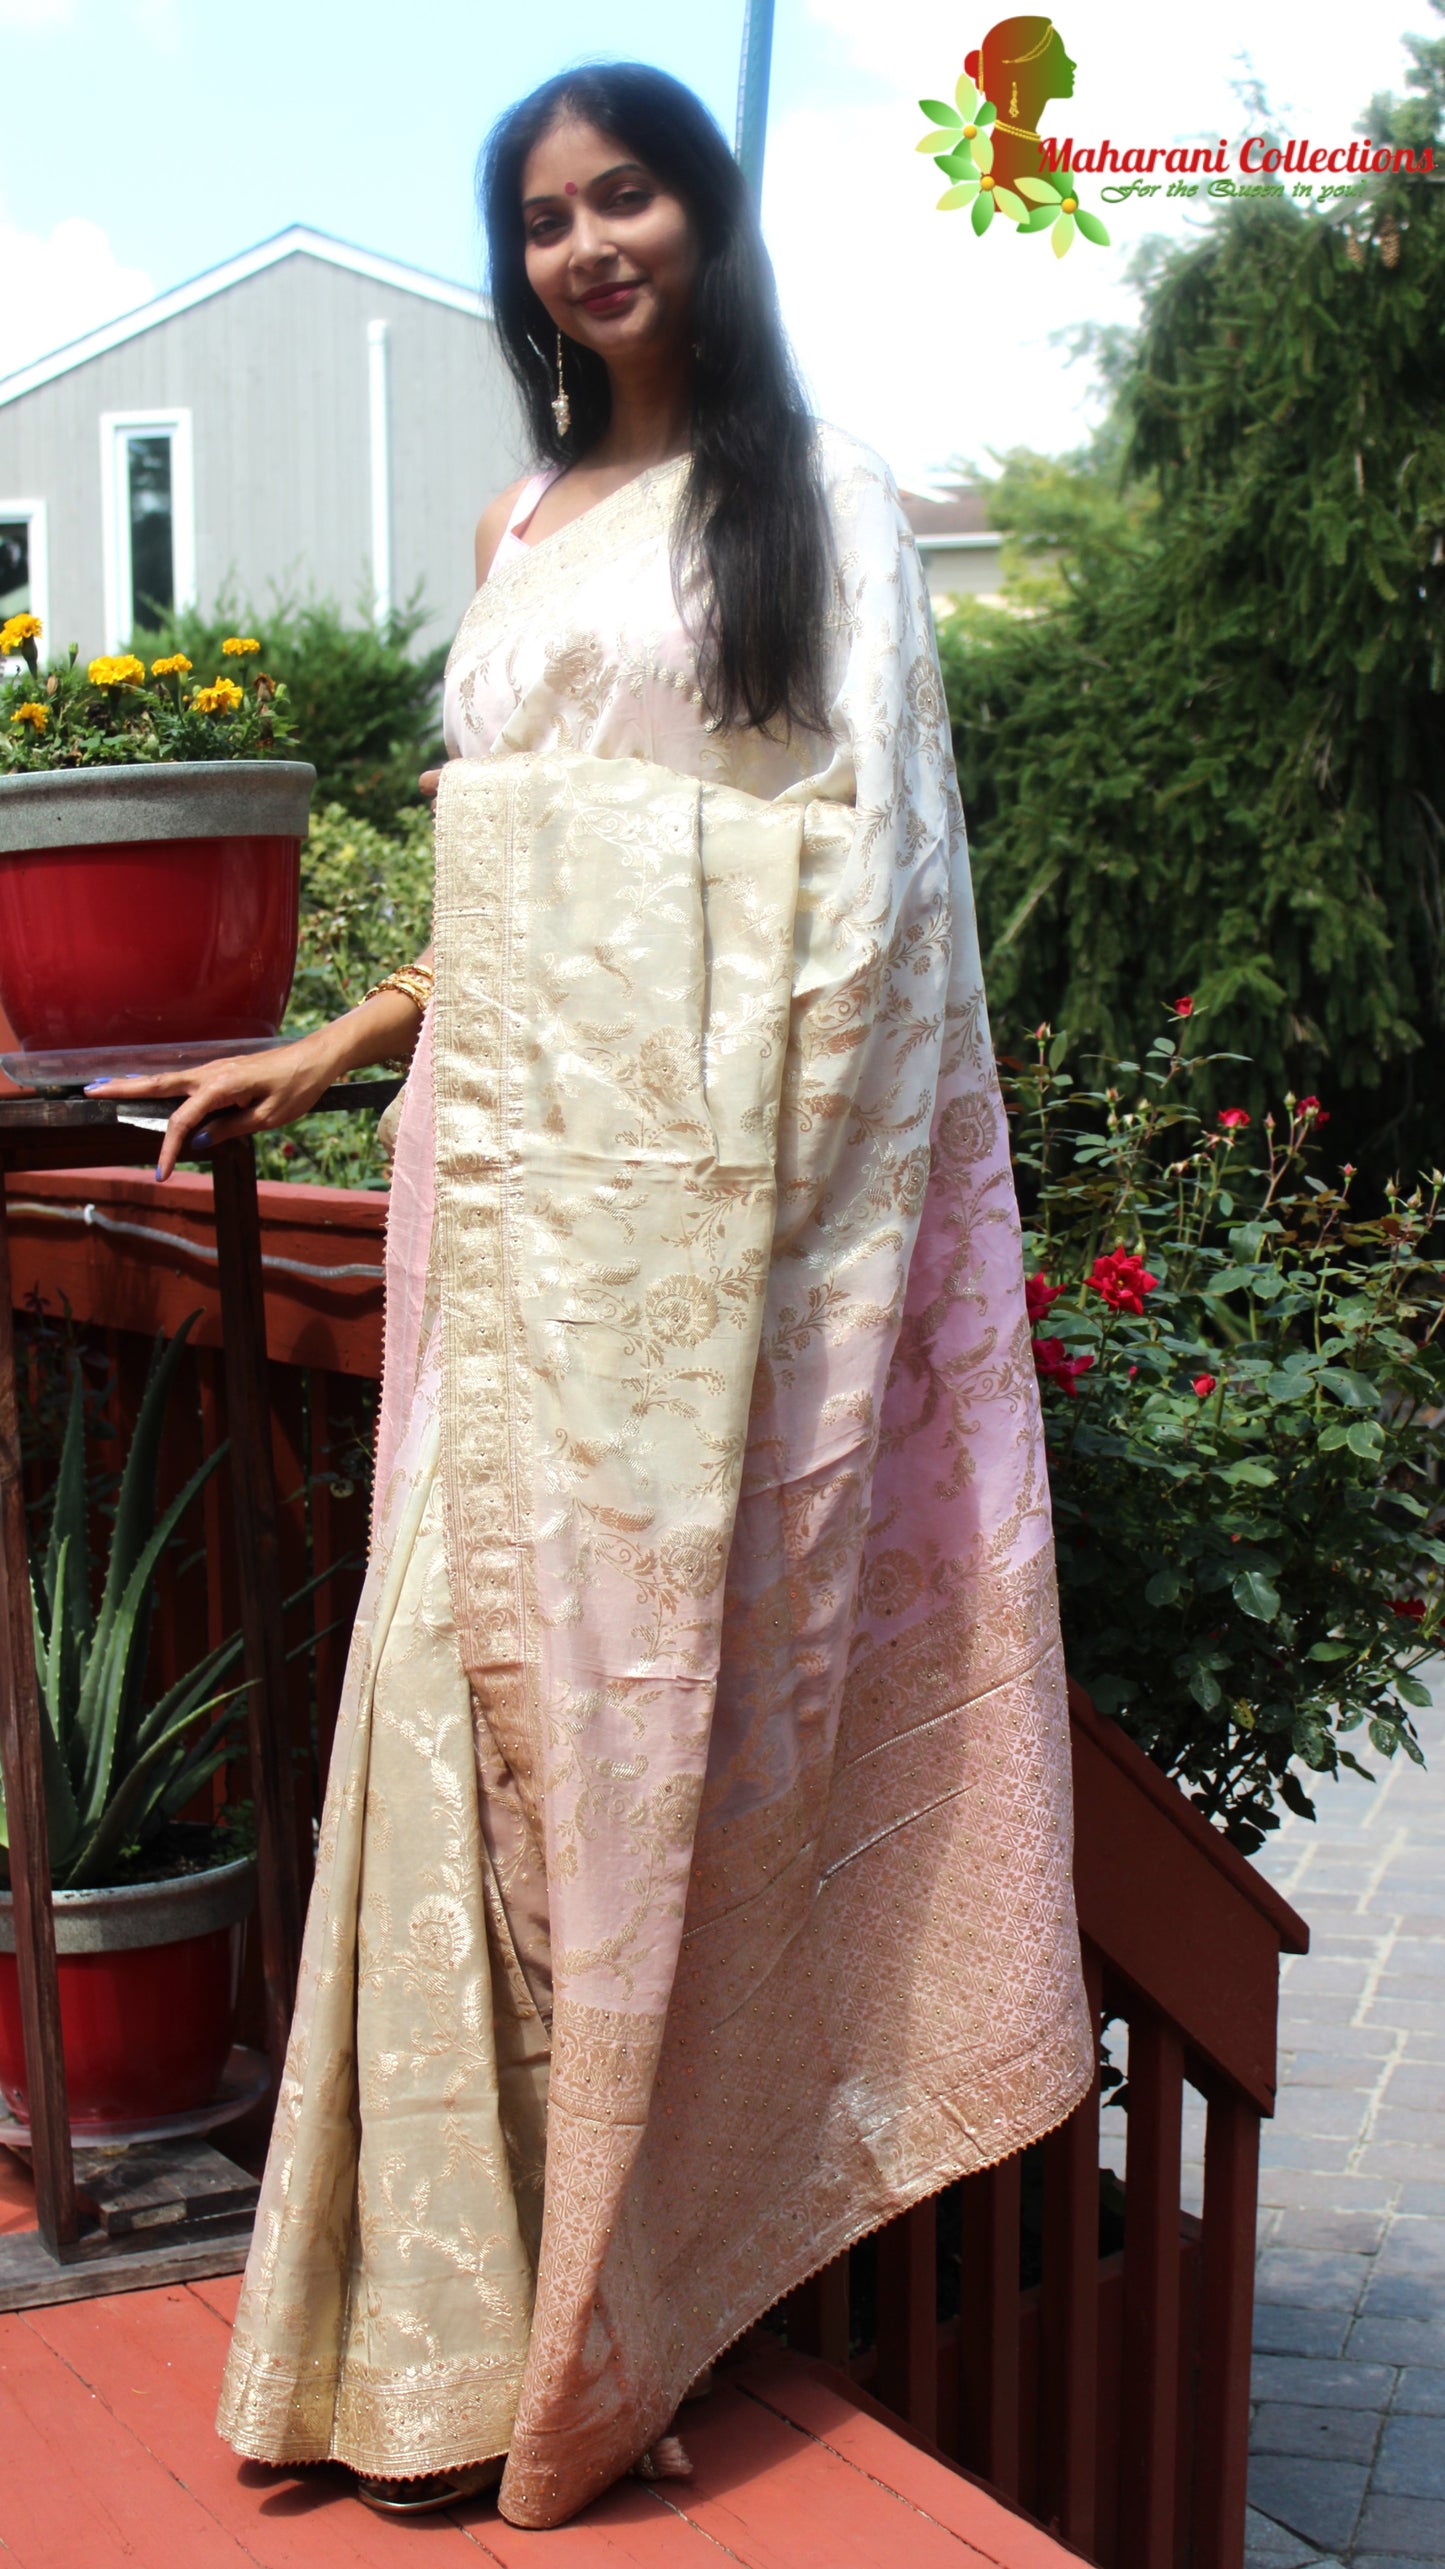 Maharani's Pure Banarasi Georgette Saree - Shades of Sand and Pink (with stitched Blouse and Petticoat)